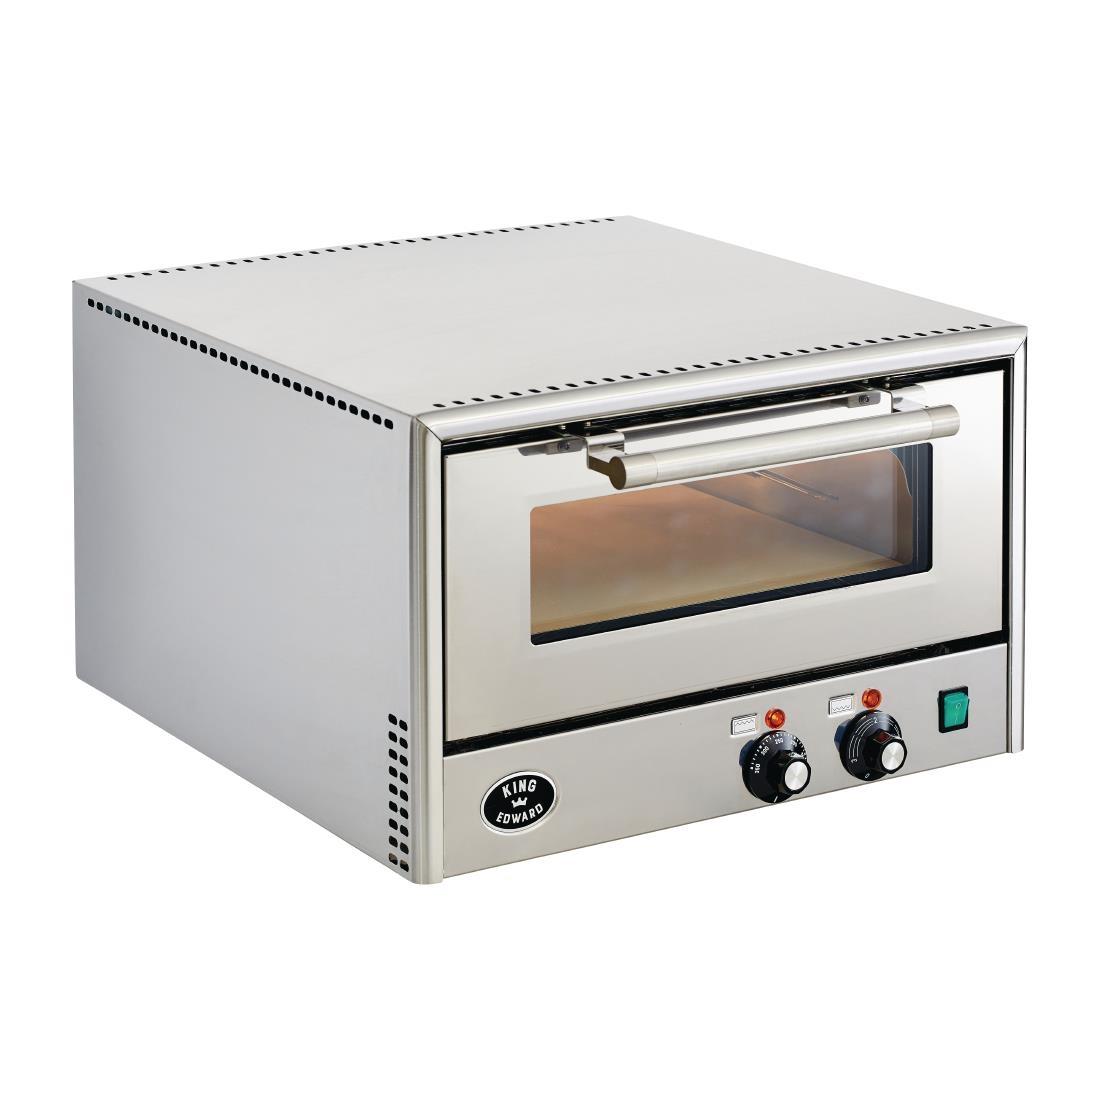 King Edward Colore Pizza Oven Stainless Steel - FT647  - 1